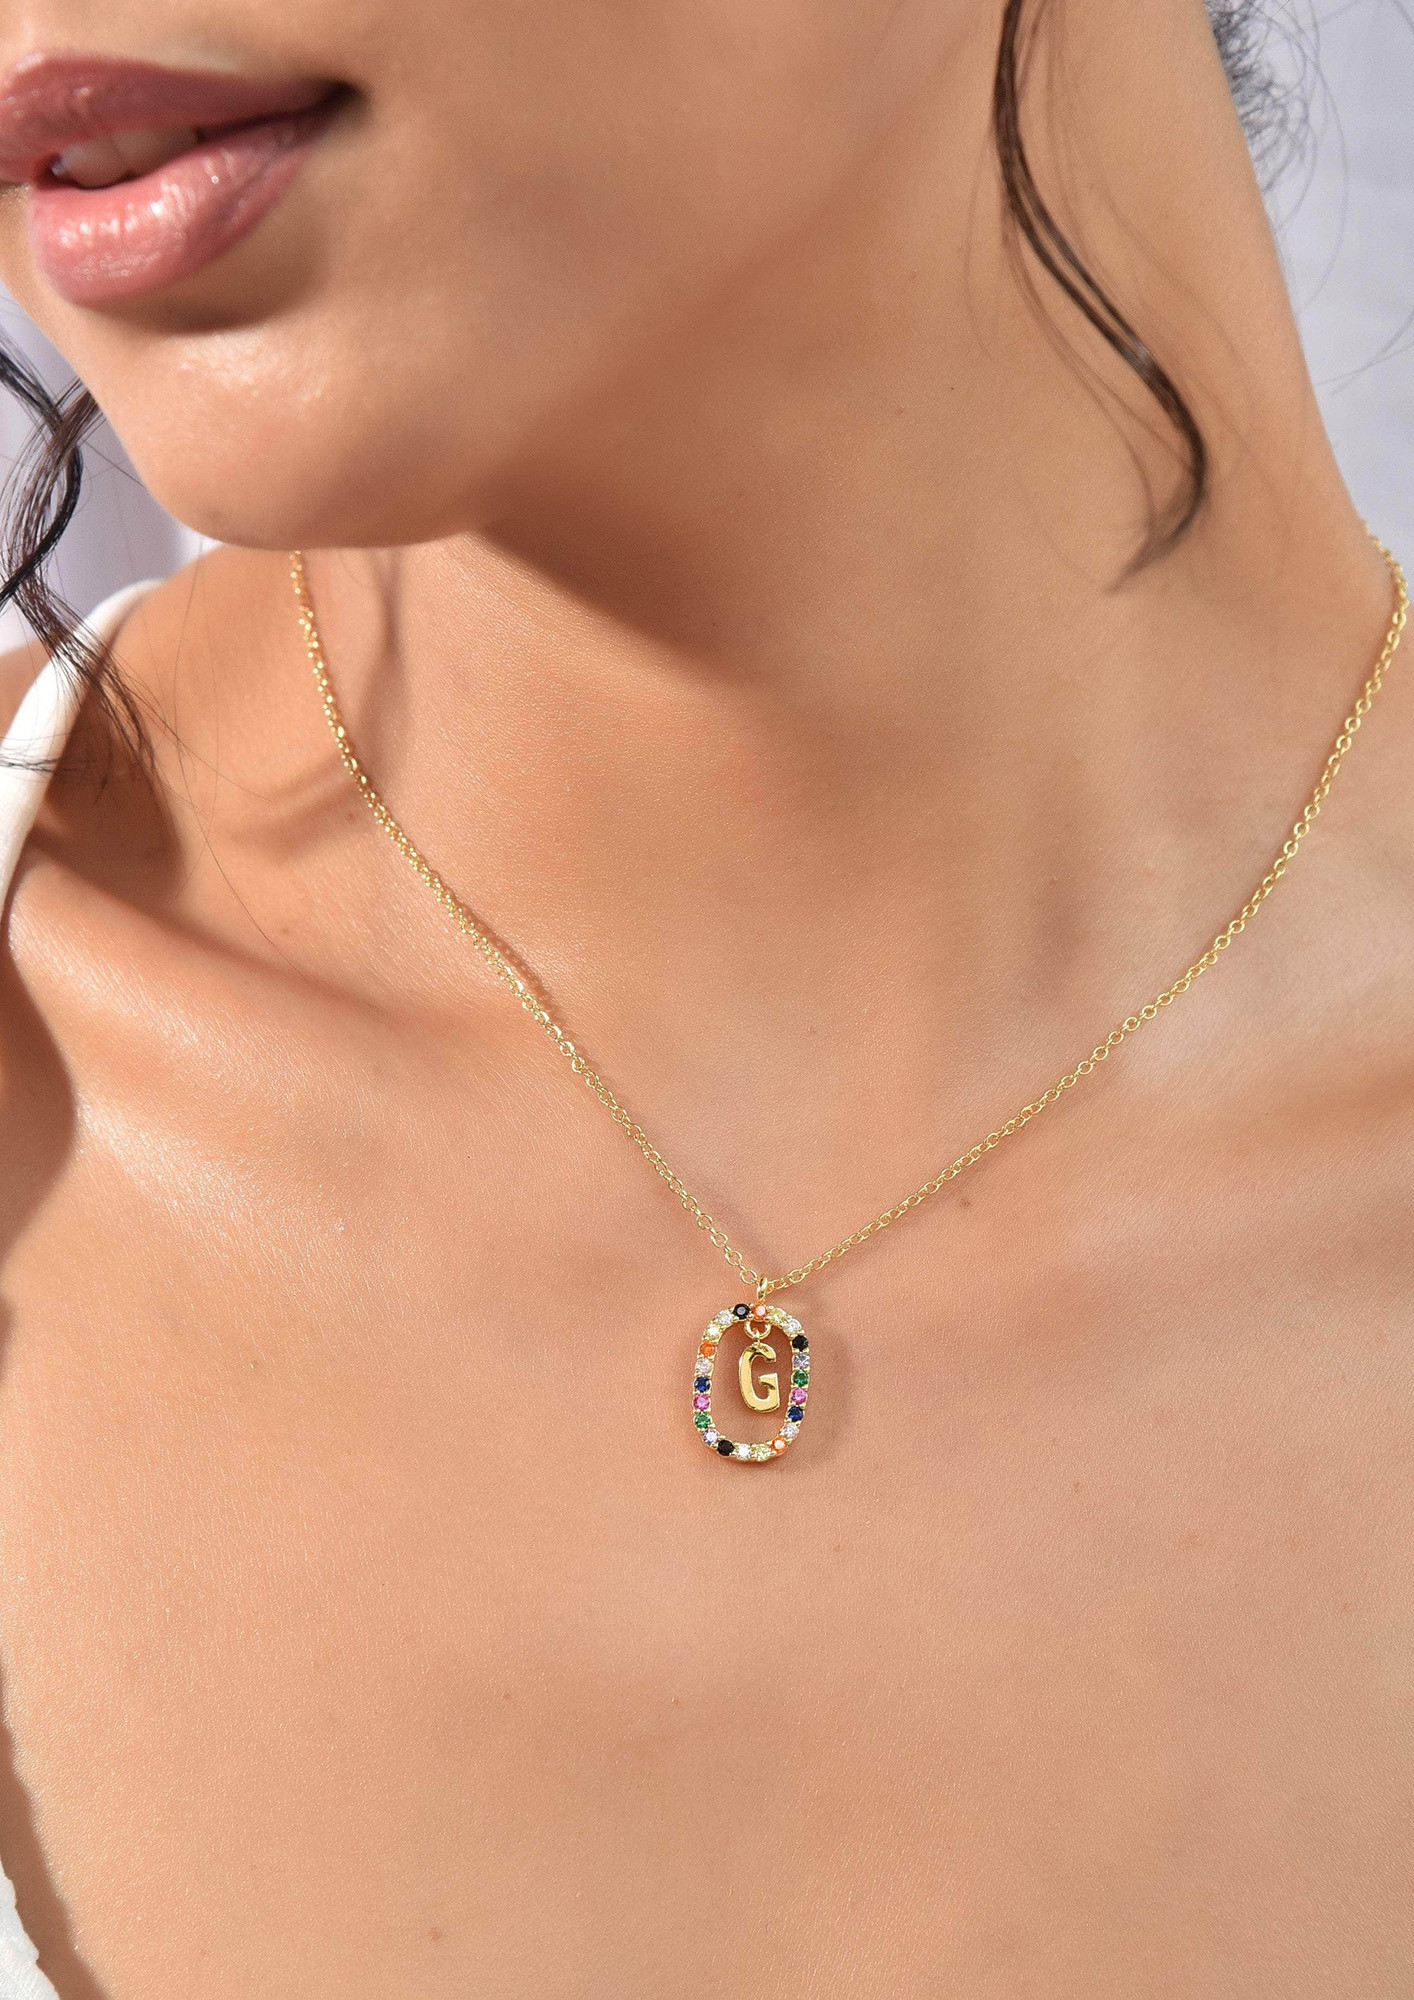 Personalised Initial Letter Necklace-G